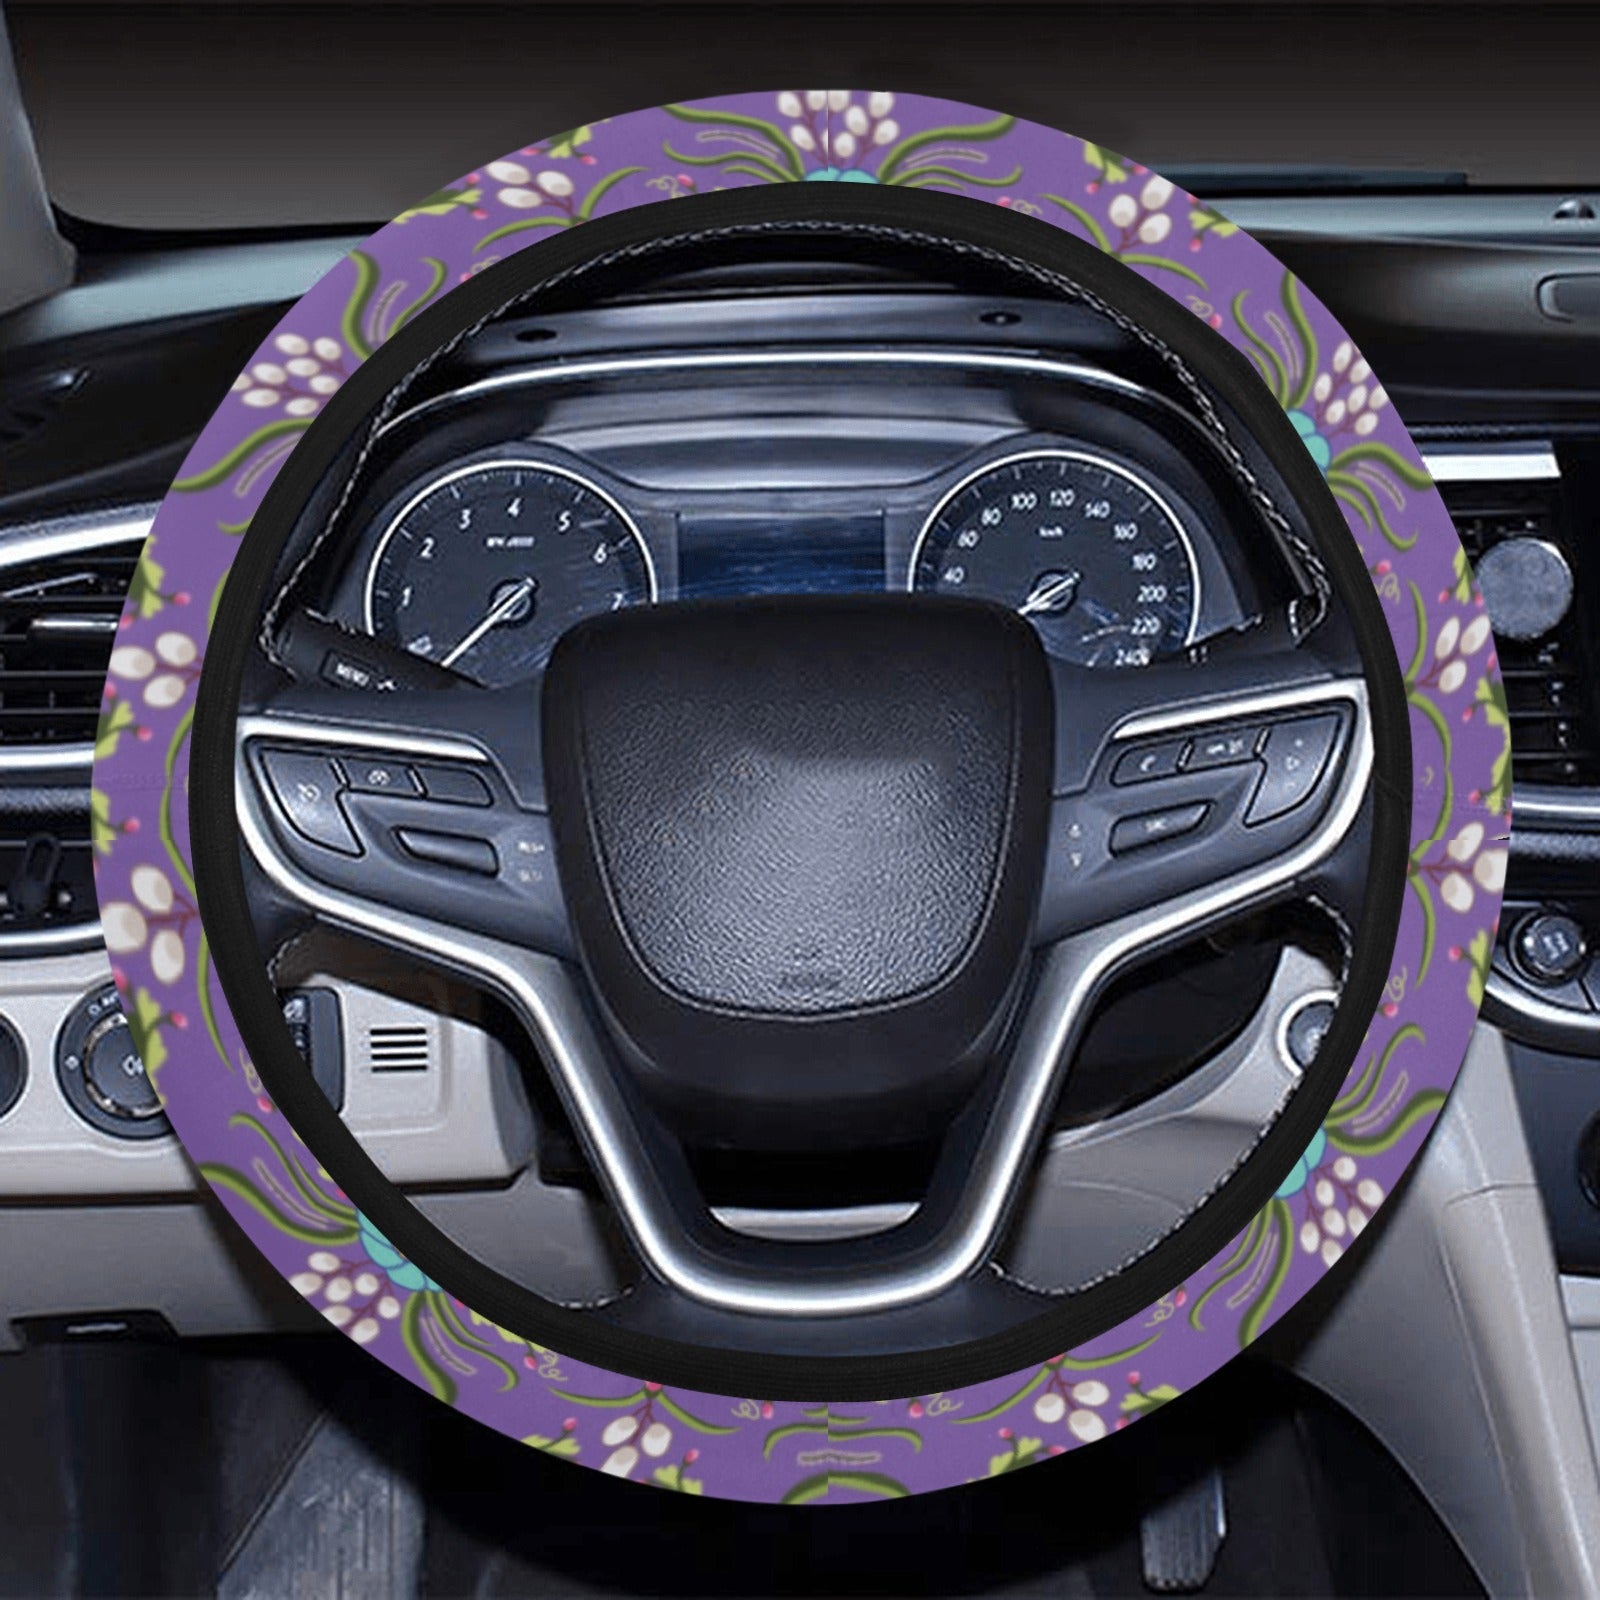 First Bloom Royal Steering Wheel Cover with Elastic Edge